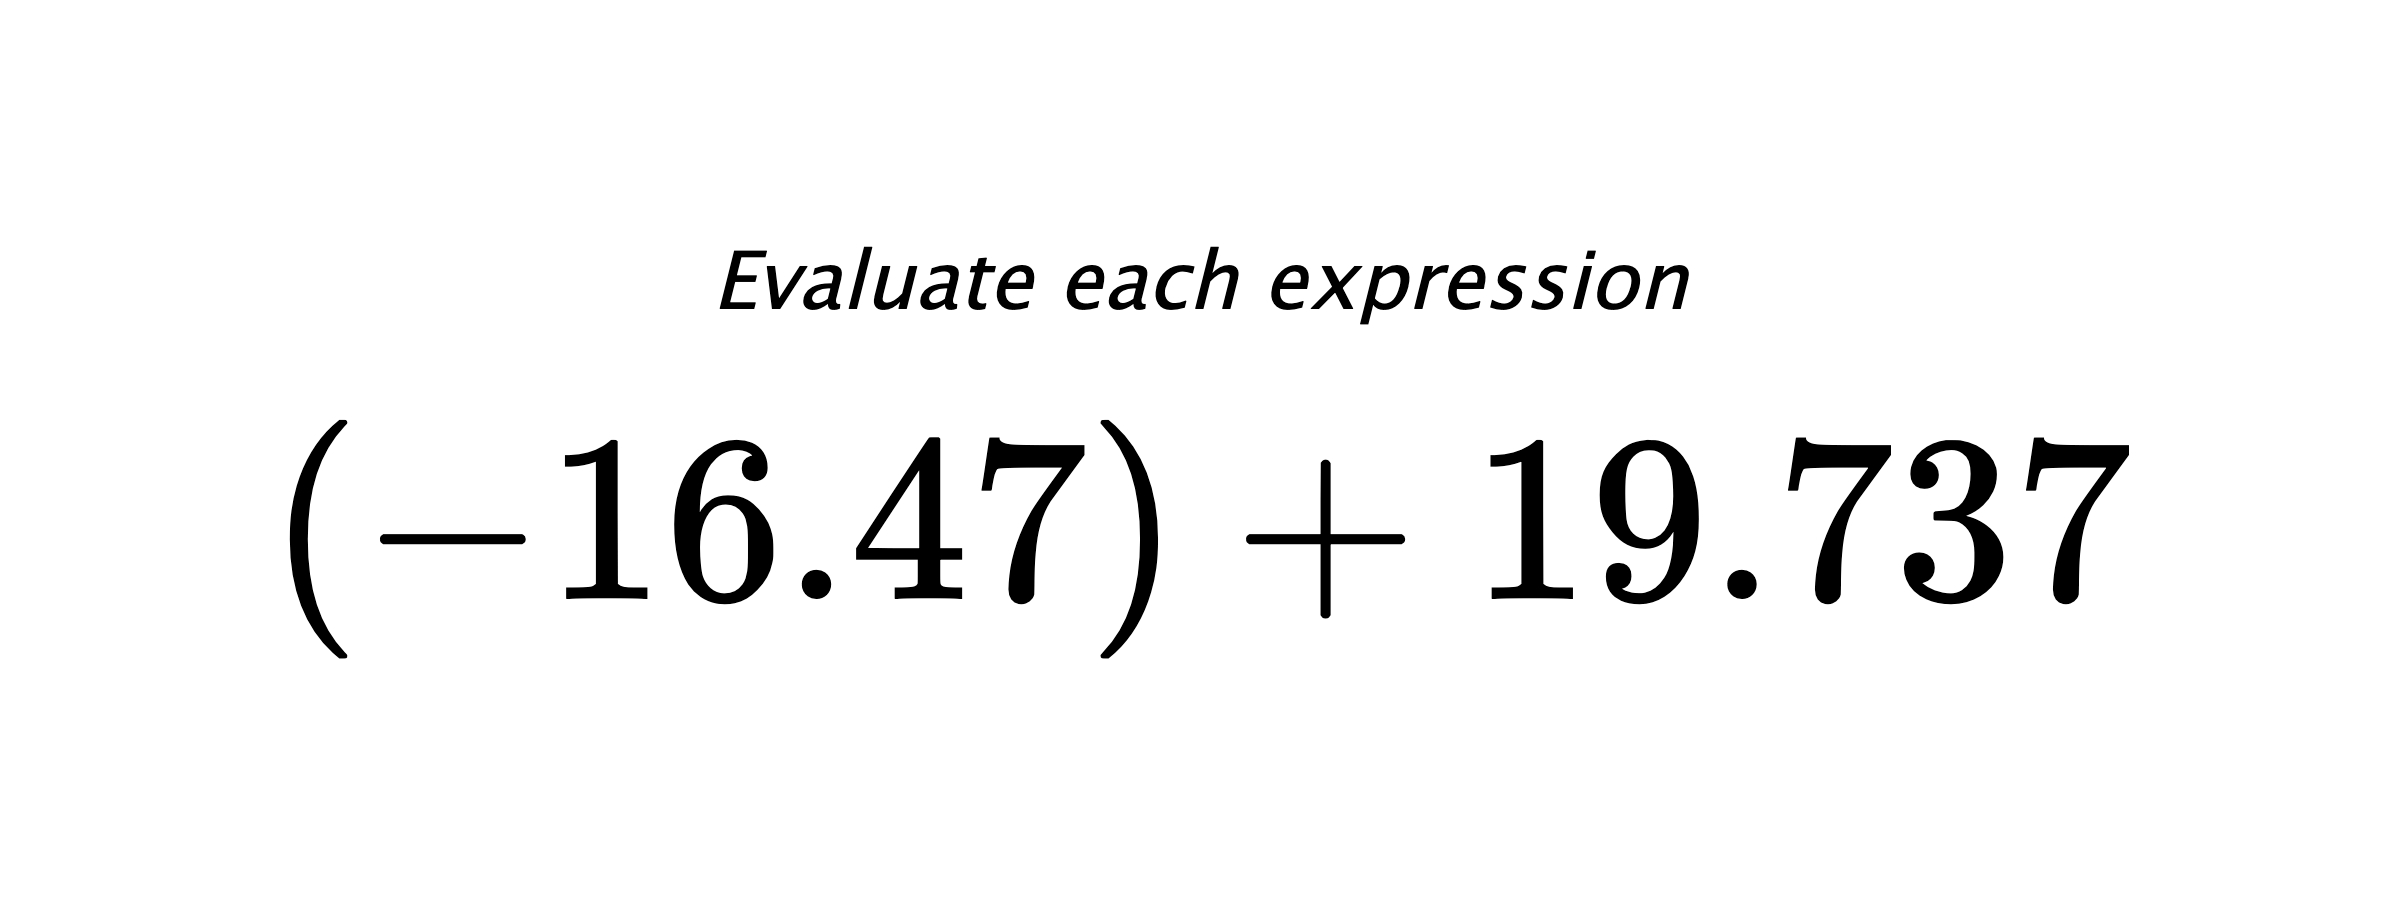 Evaluate each expression $ (-16.47)+19.737 $